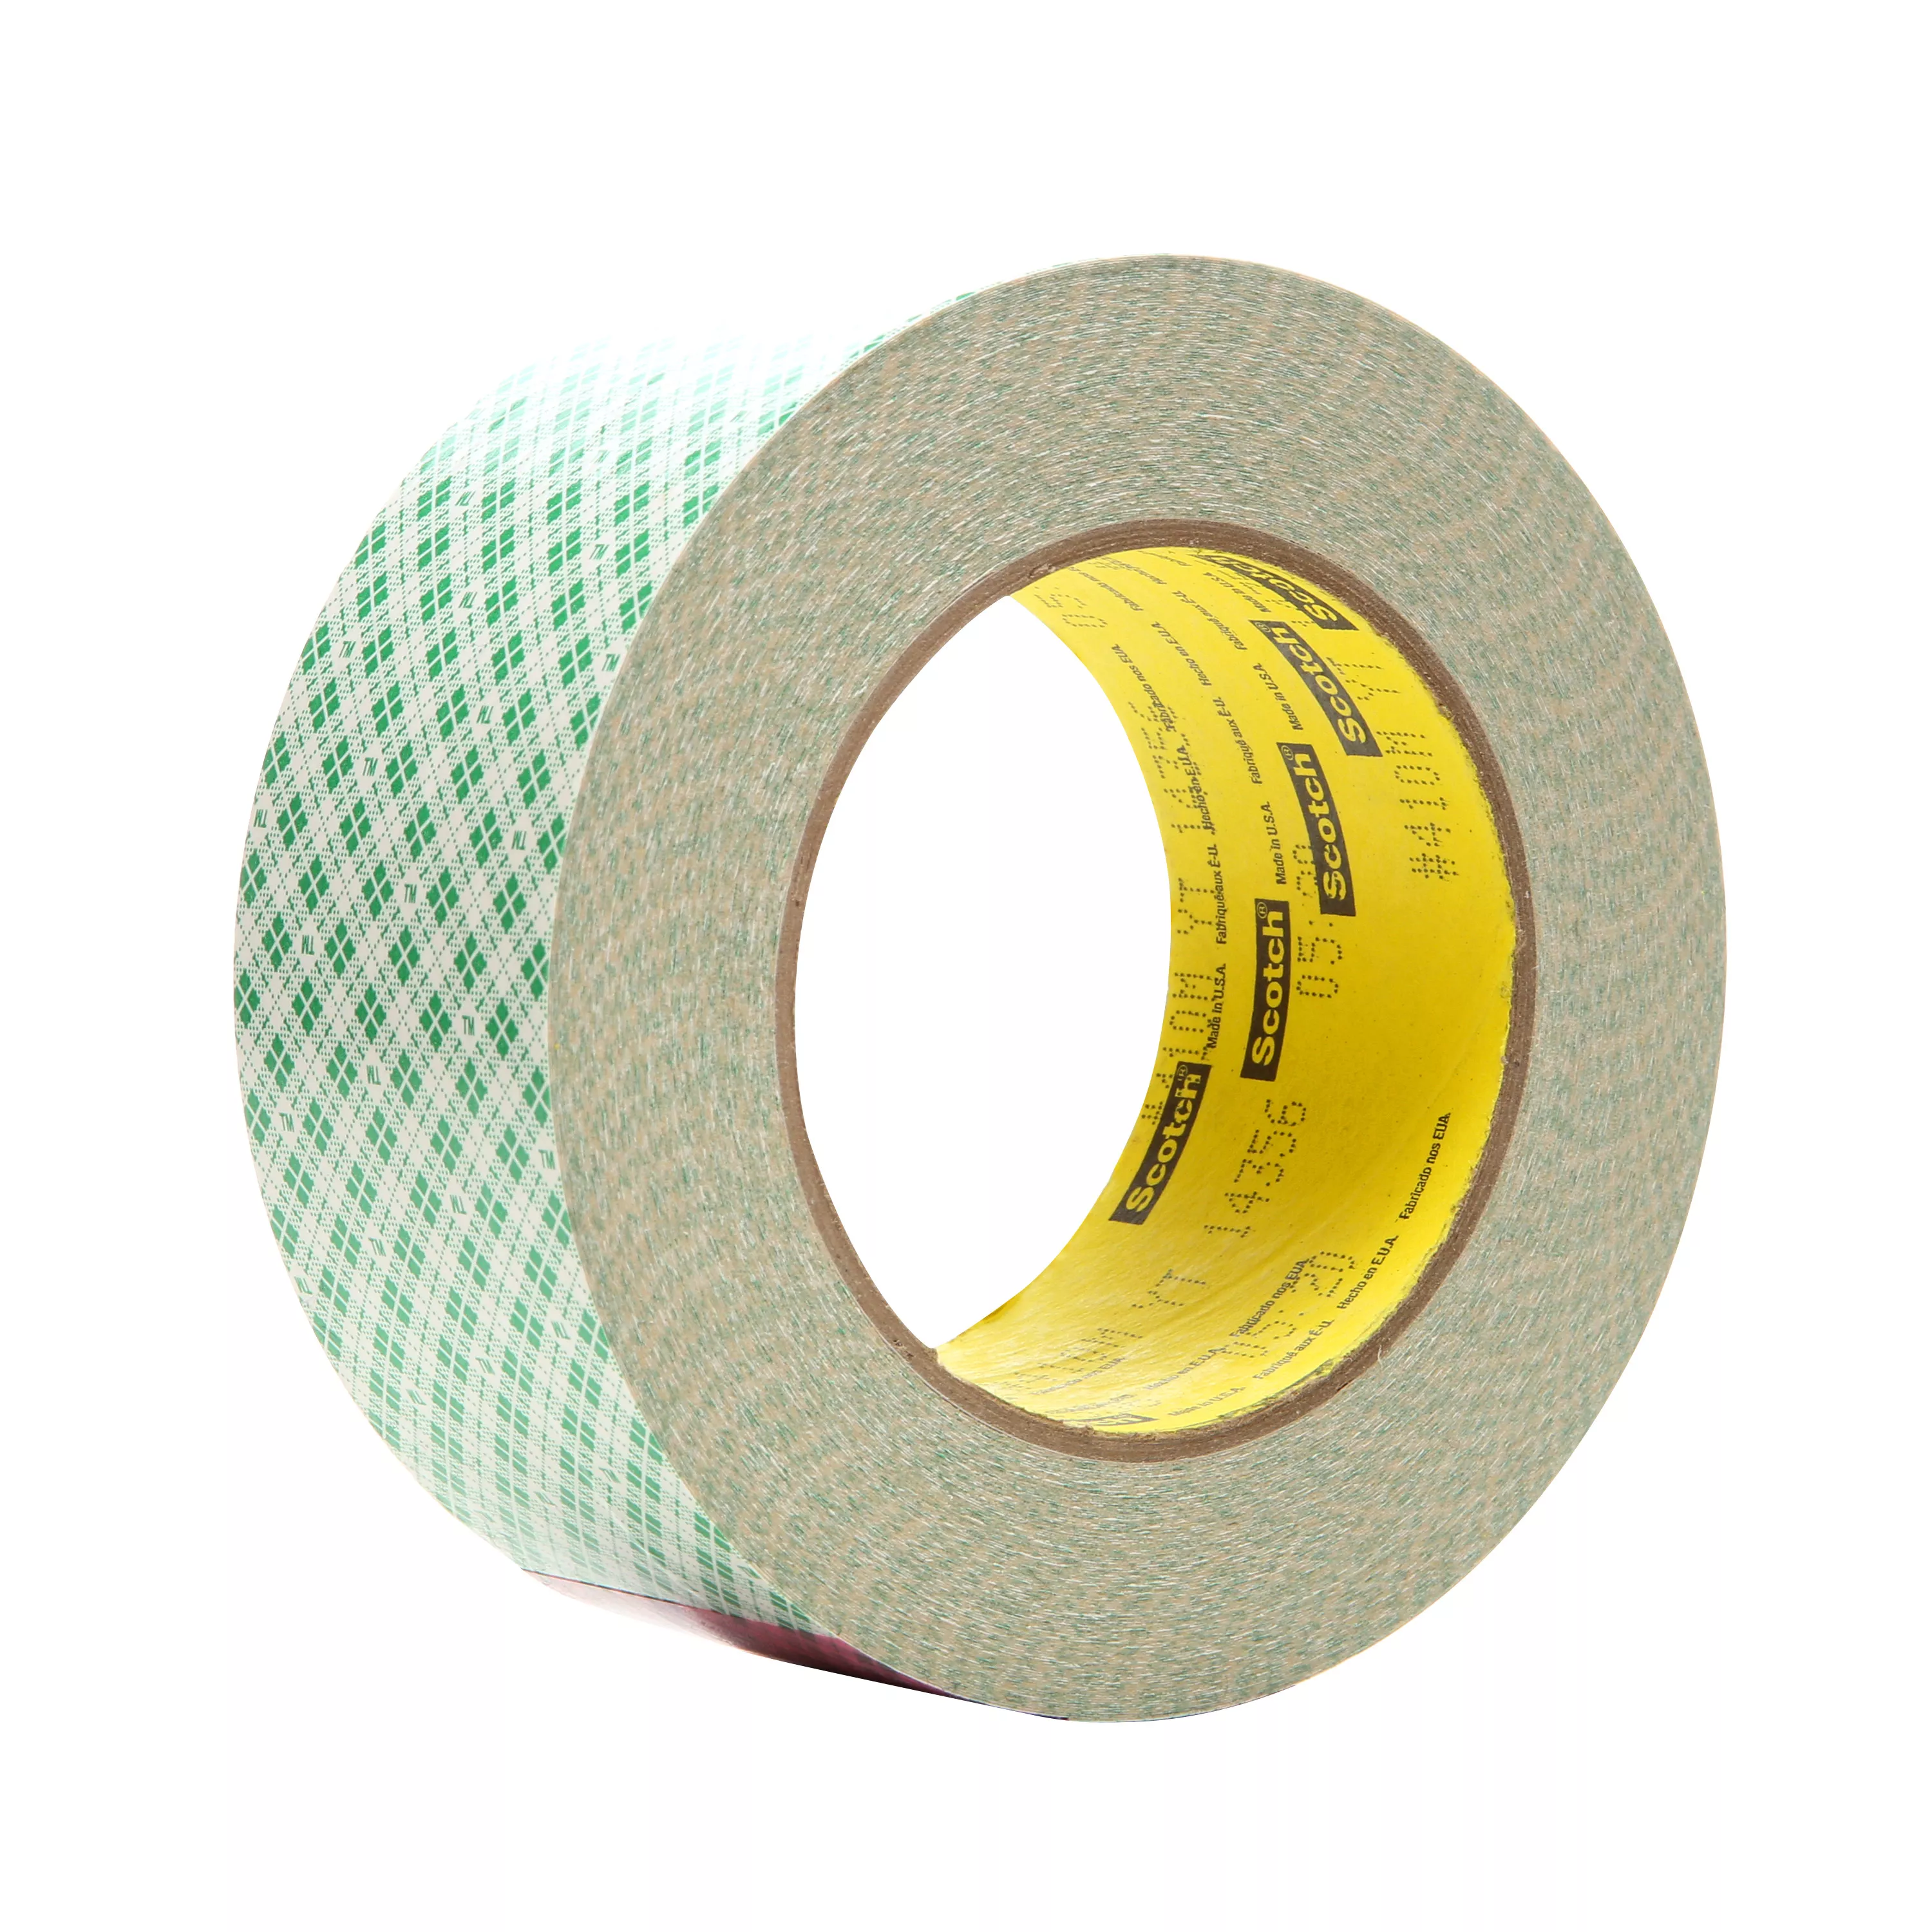 3M™ Double Coated Paper Tape 410M, Natural, 2 in x 36 yd, 5 mil, 24
rolls per case